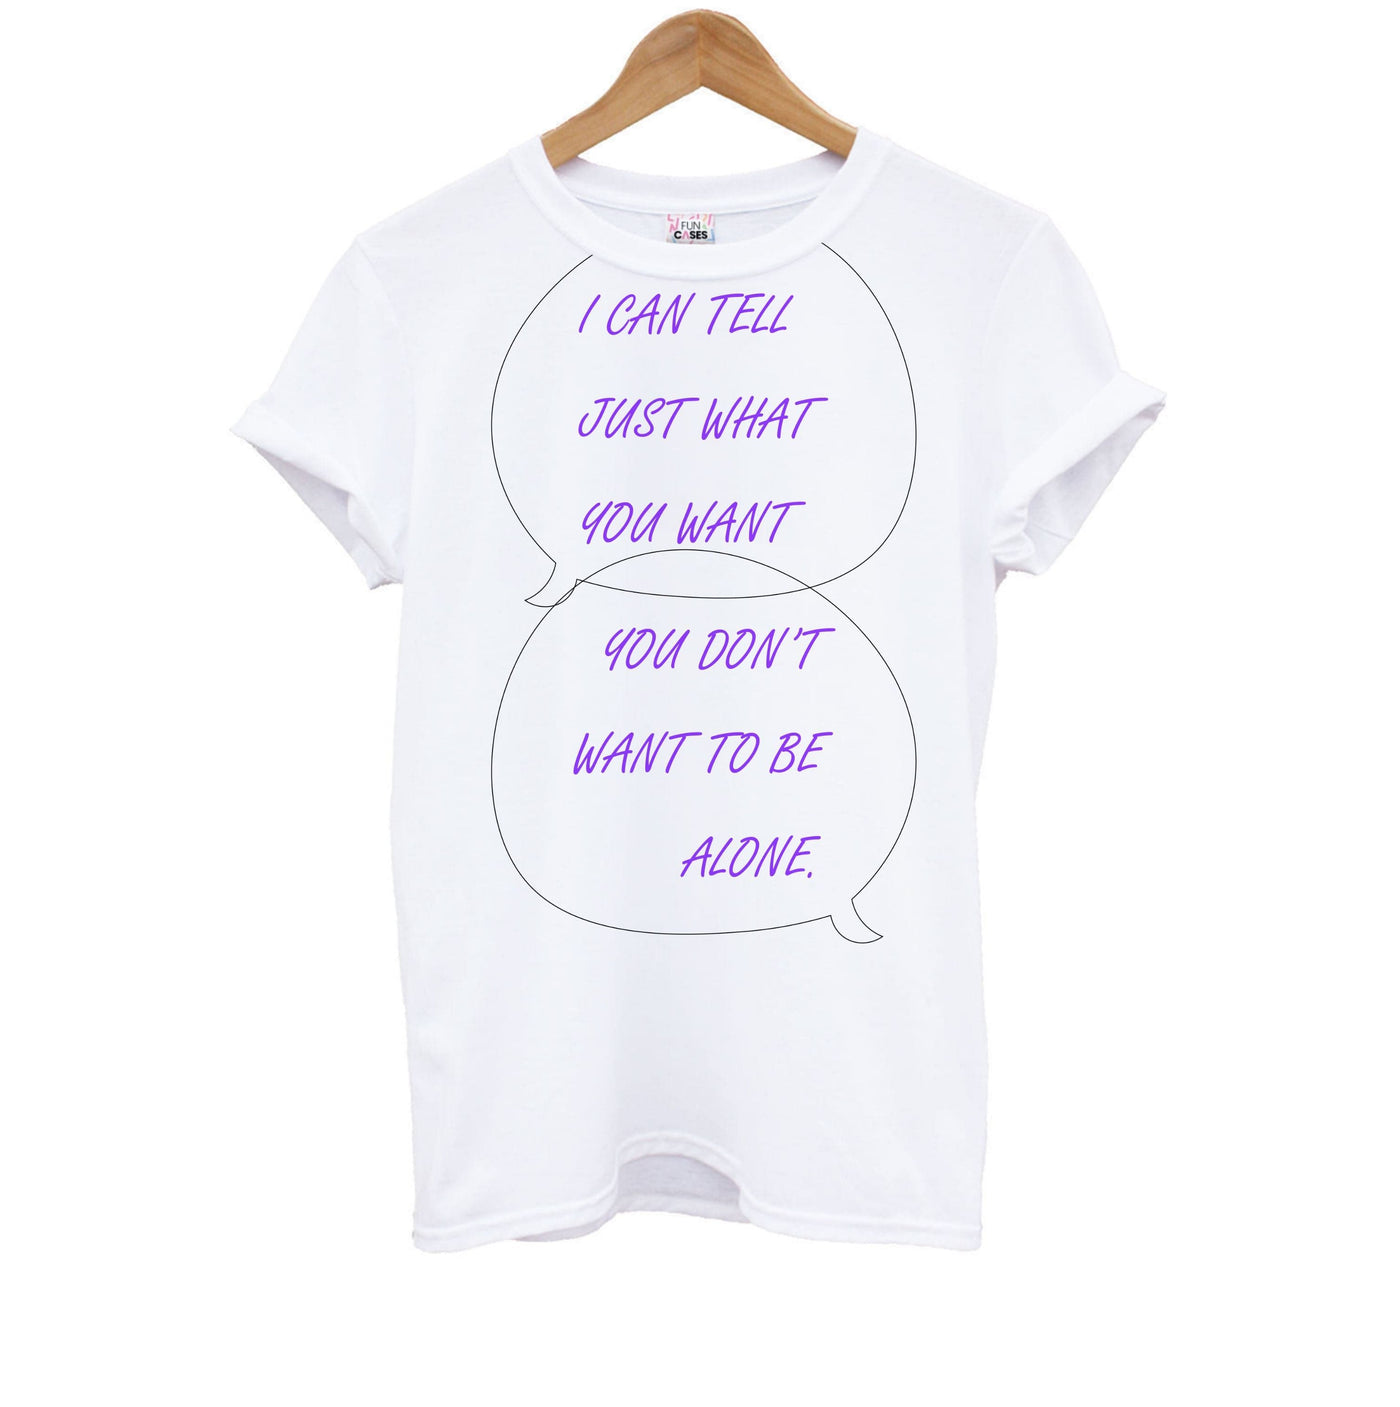 You Don't Want To Be Alone - Festival Kids T-Shirt